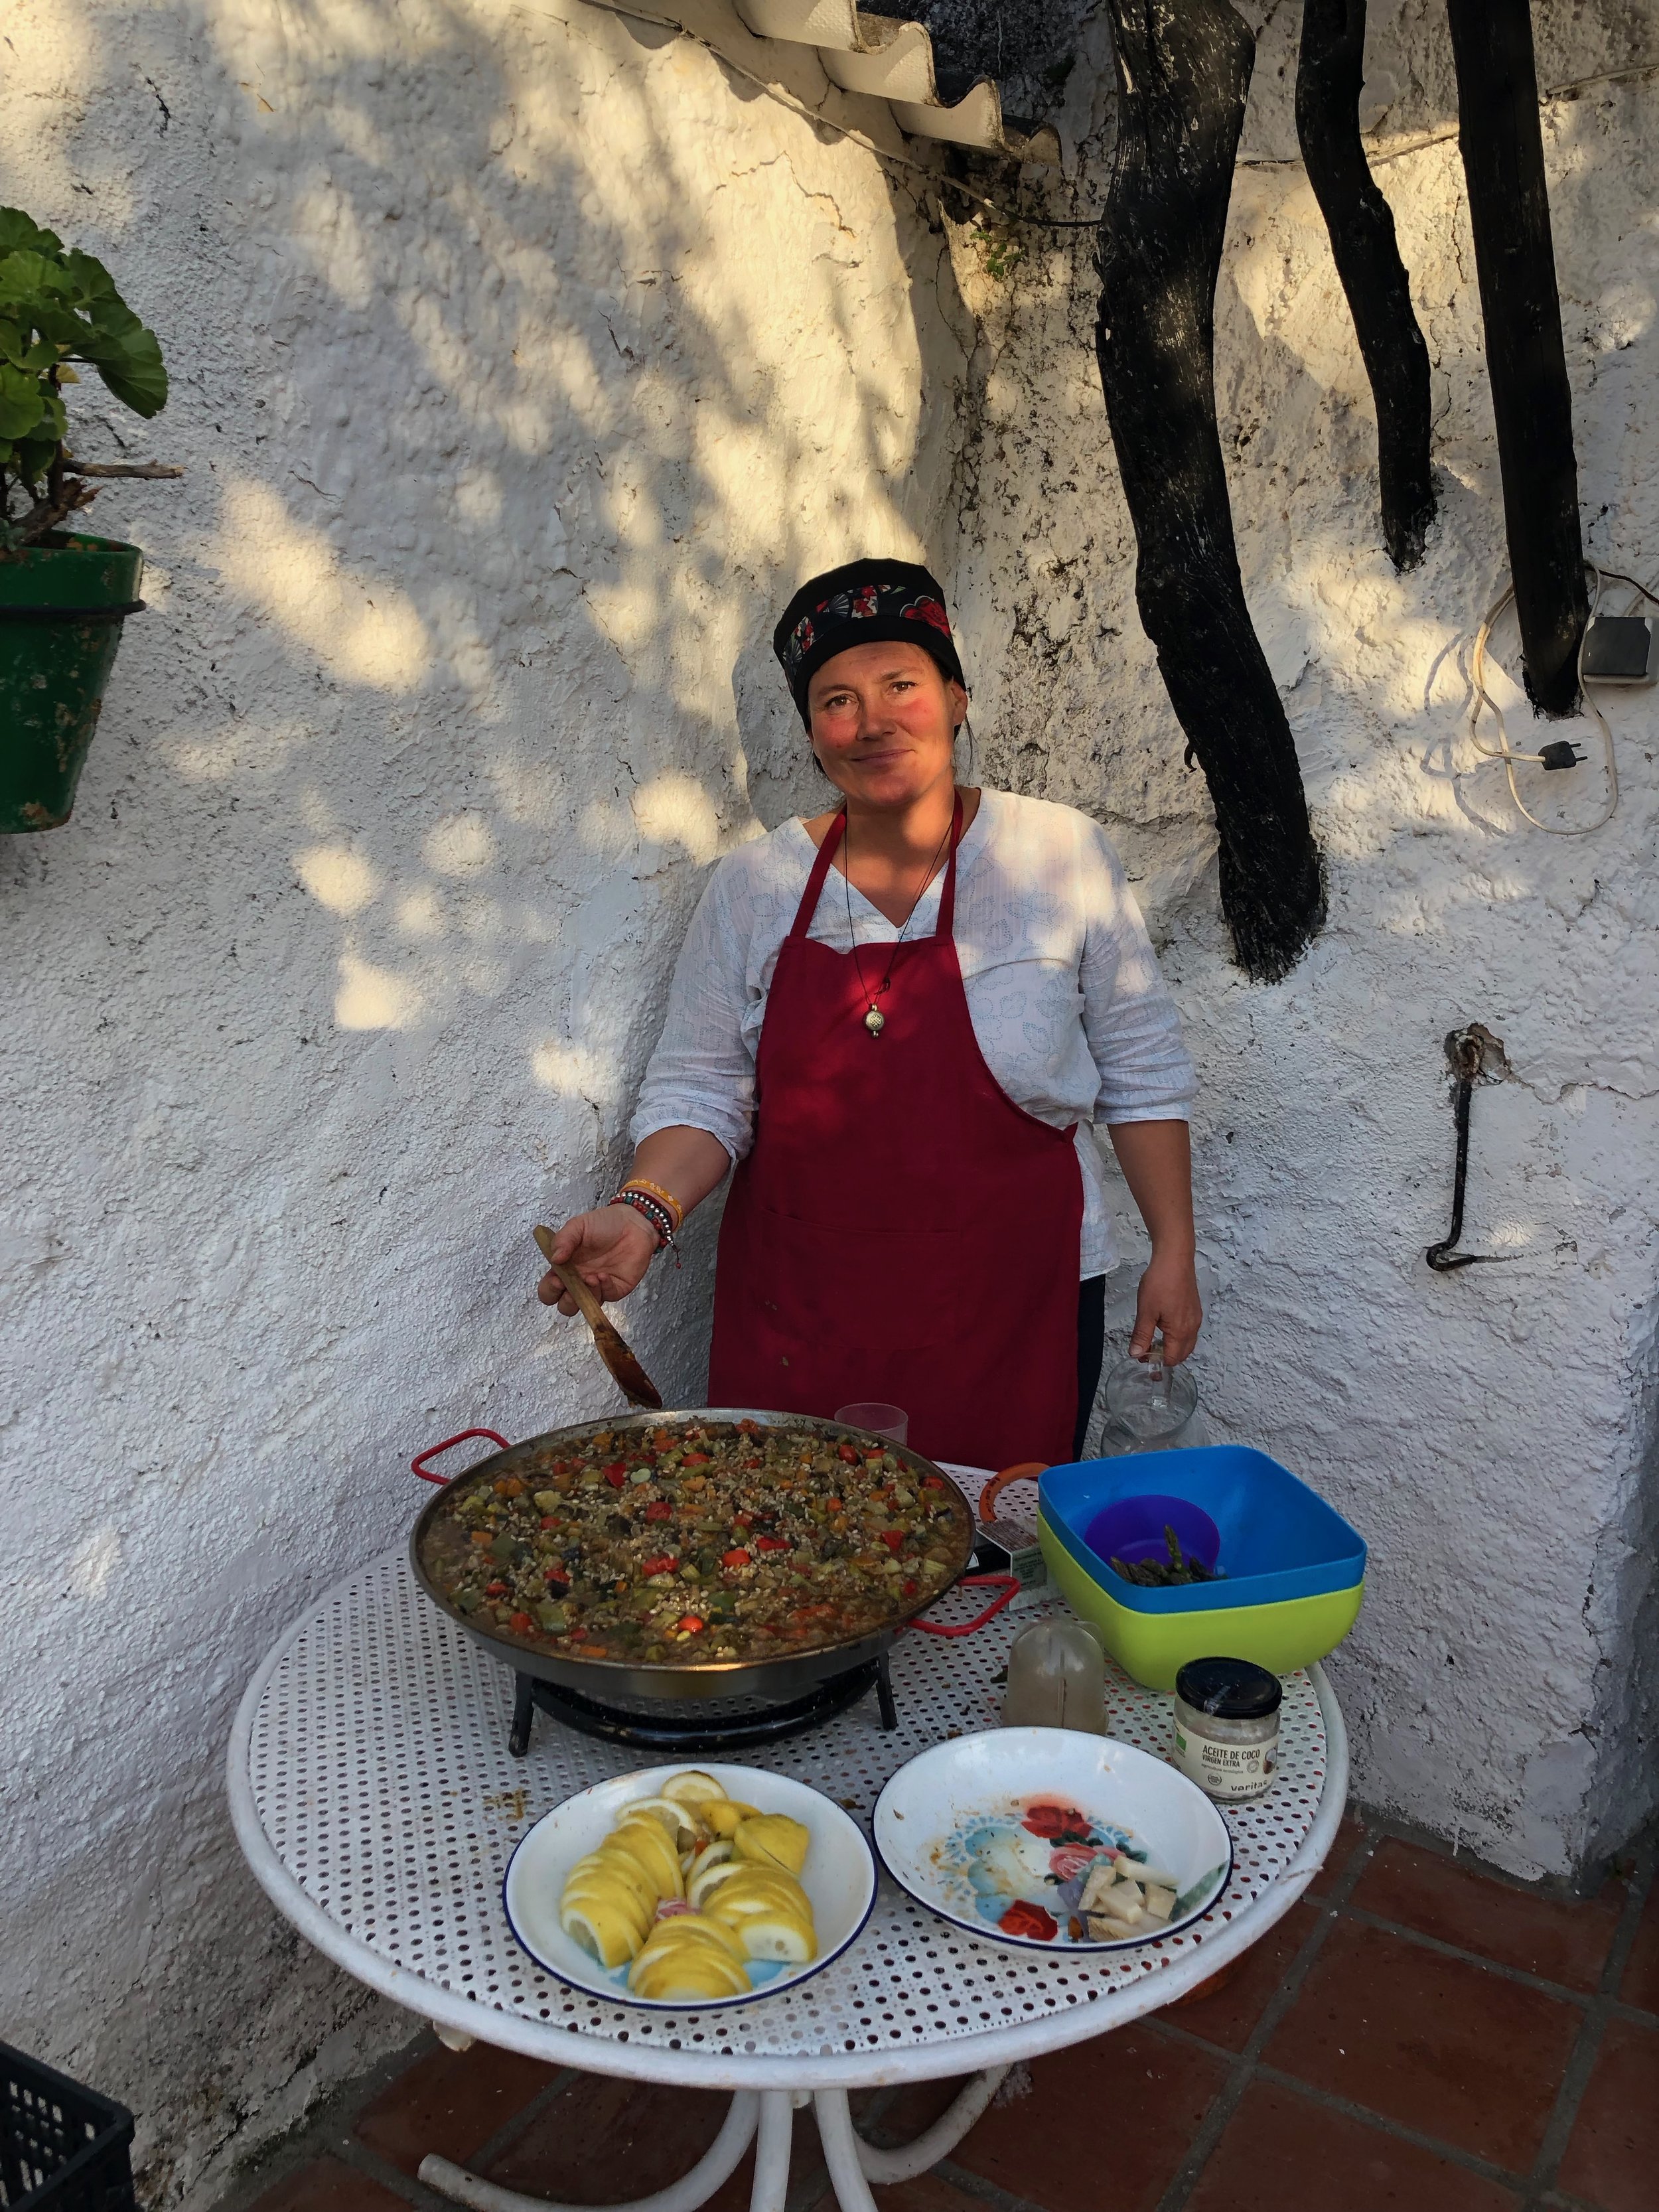 Tiziana with her vegan paella at Yin Yang Yoga retreat in the Malaga mountains in Spain with Jane Bakx Yoga 